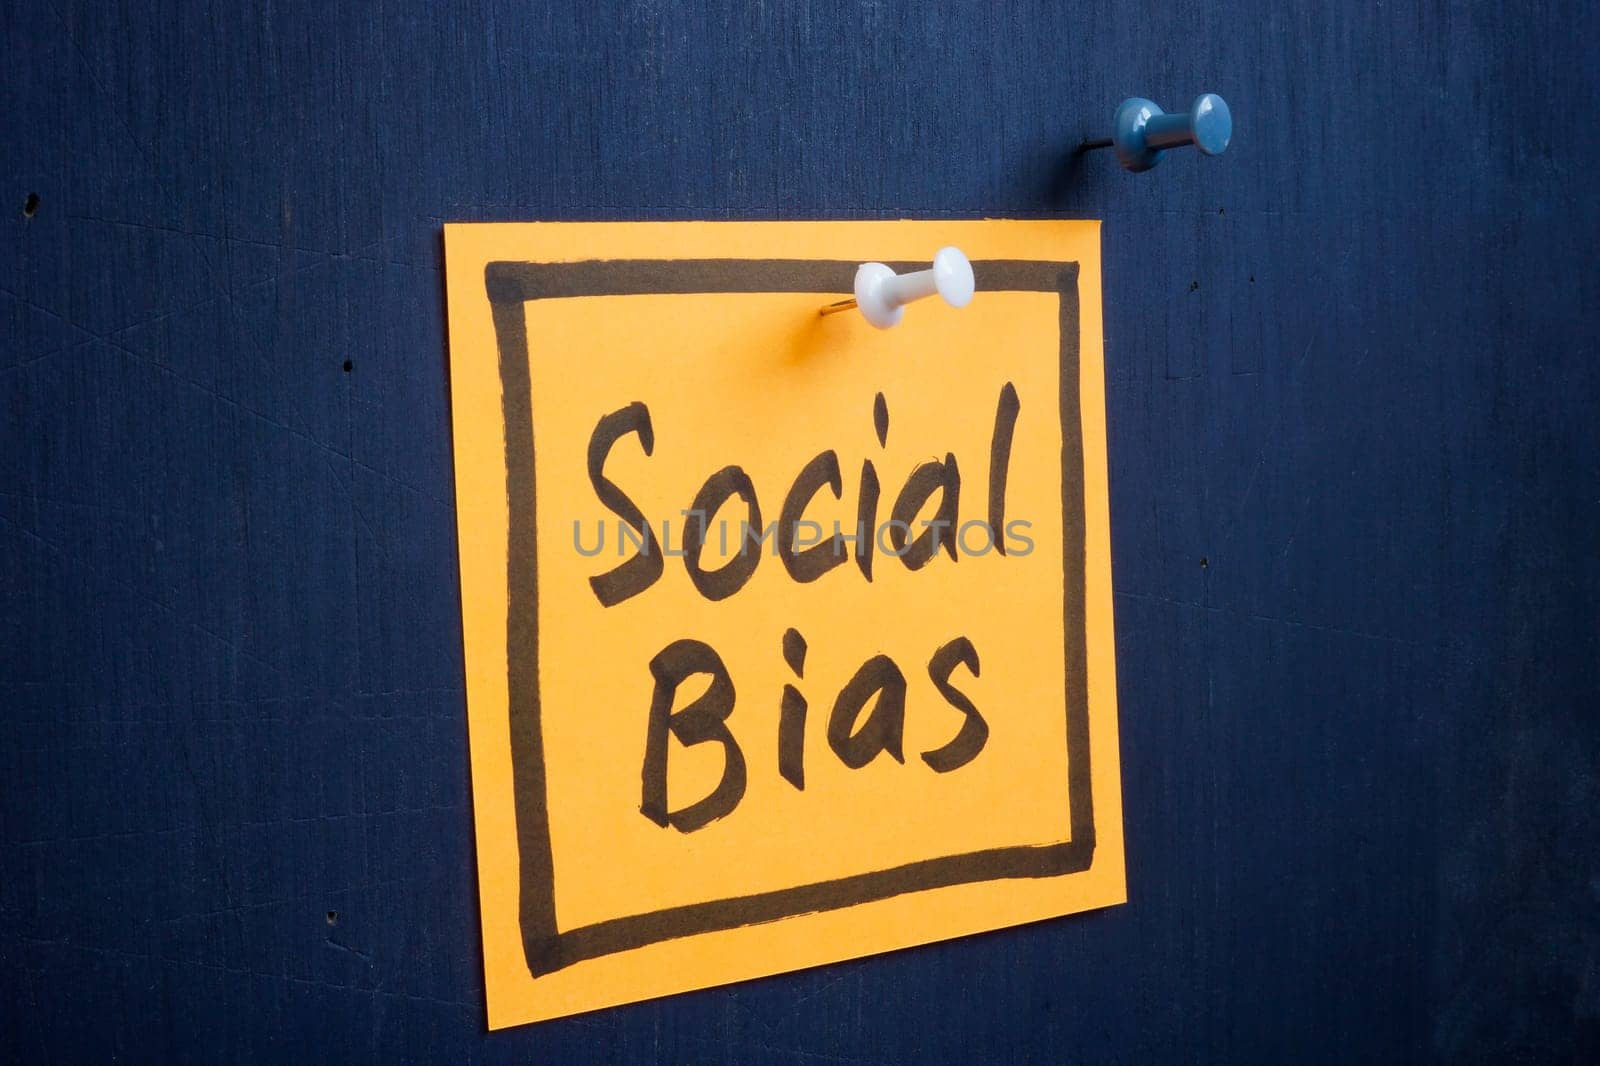 Piece of paper with an inscription social bias is pinned to the board.